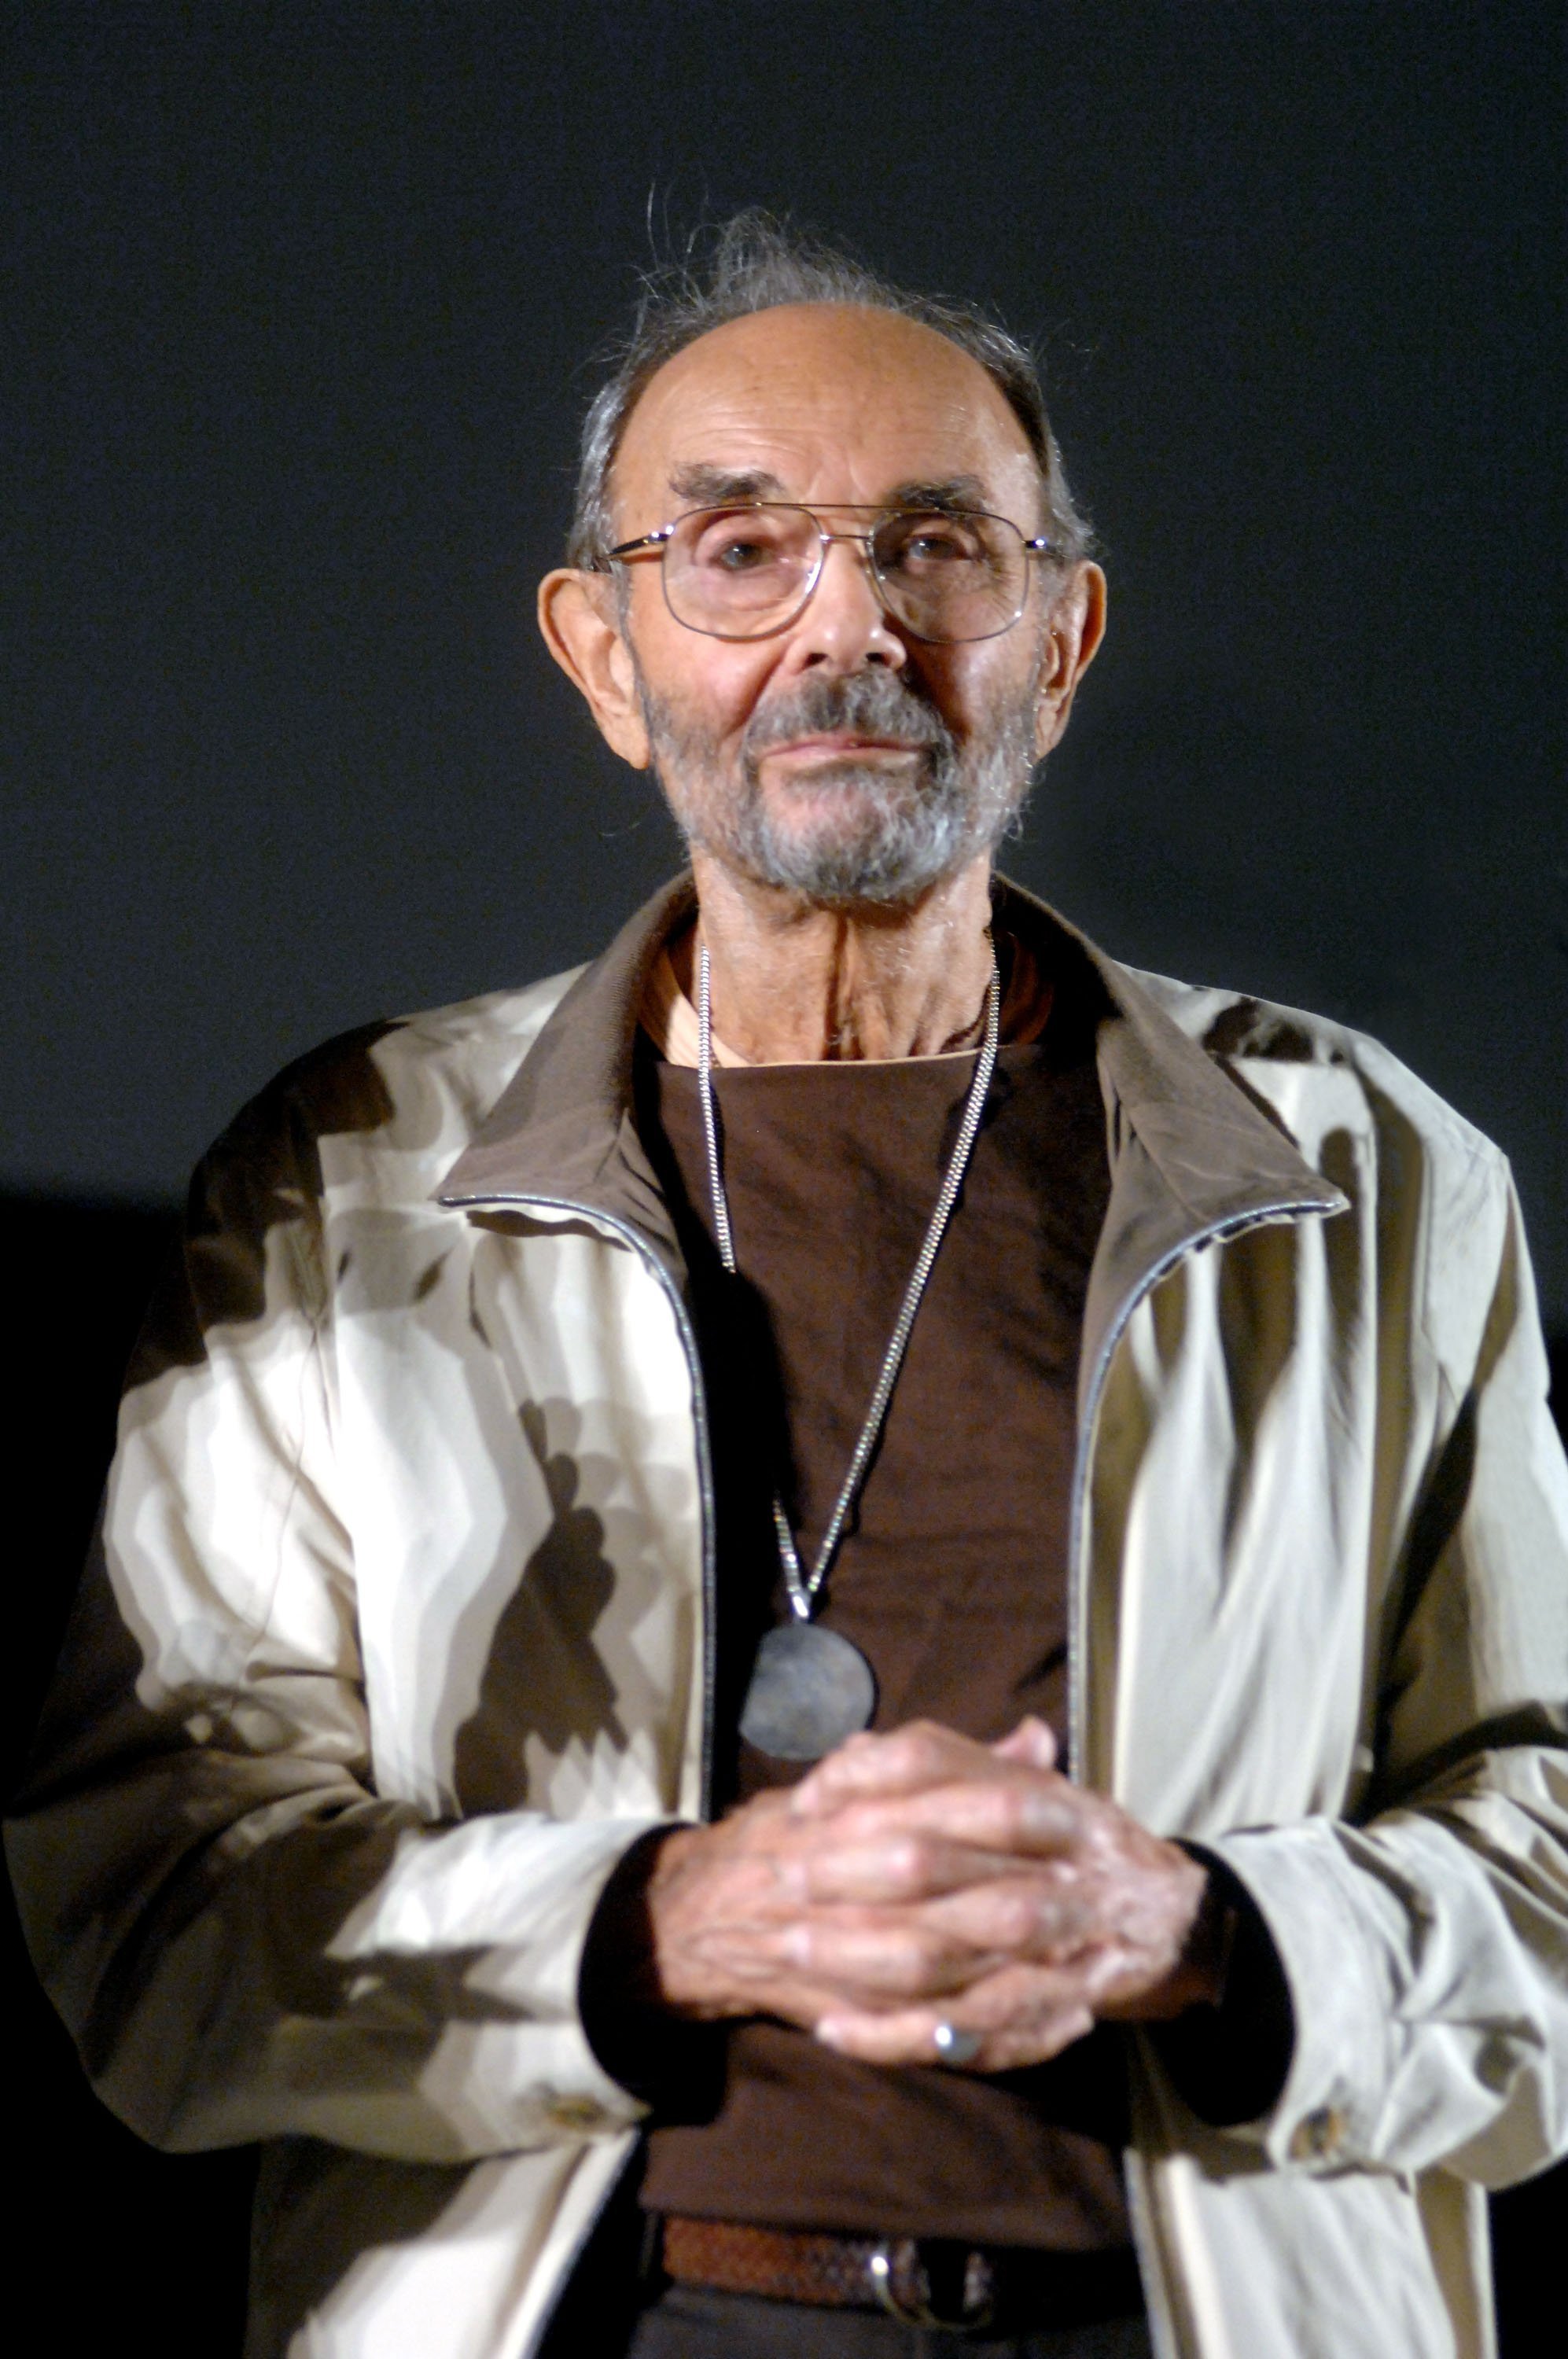 Stanley Donen prior to a viewing of "Singin' in the Rain" in Bologna, Italy